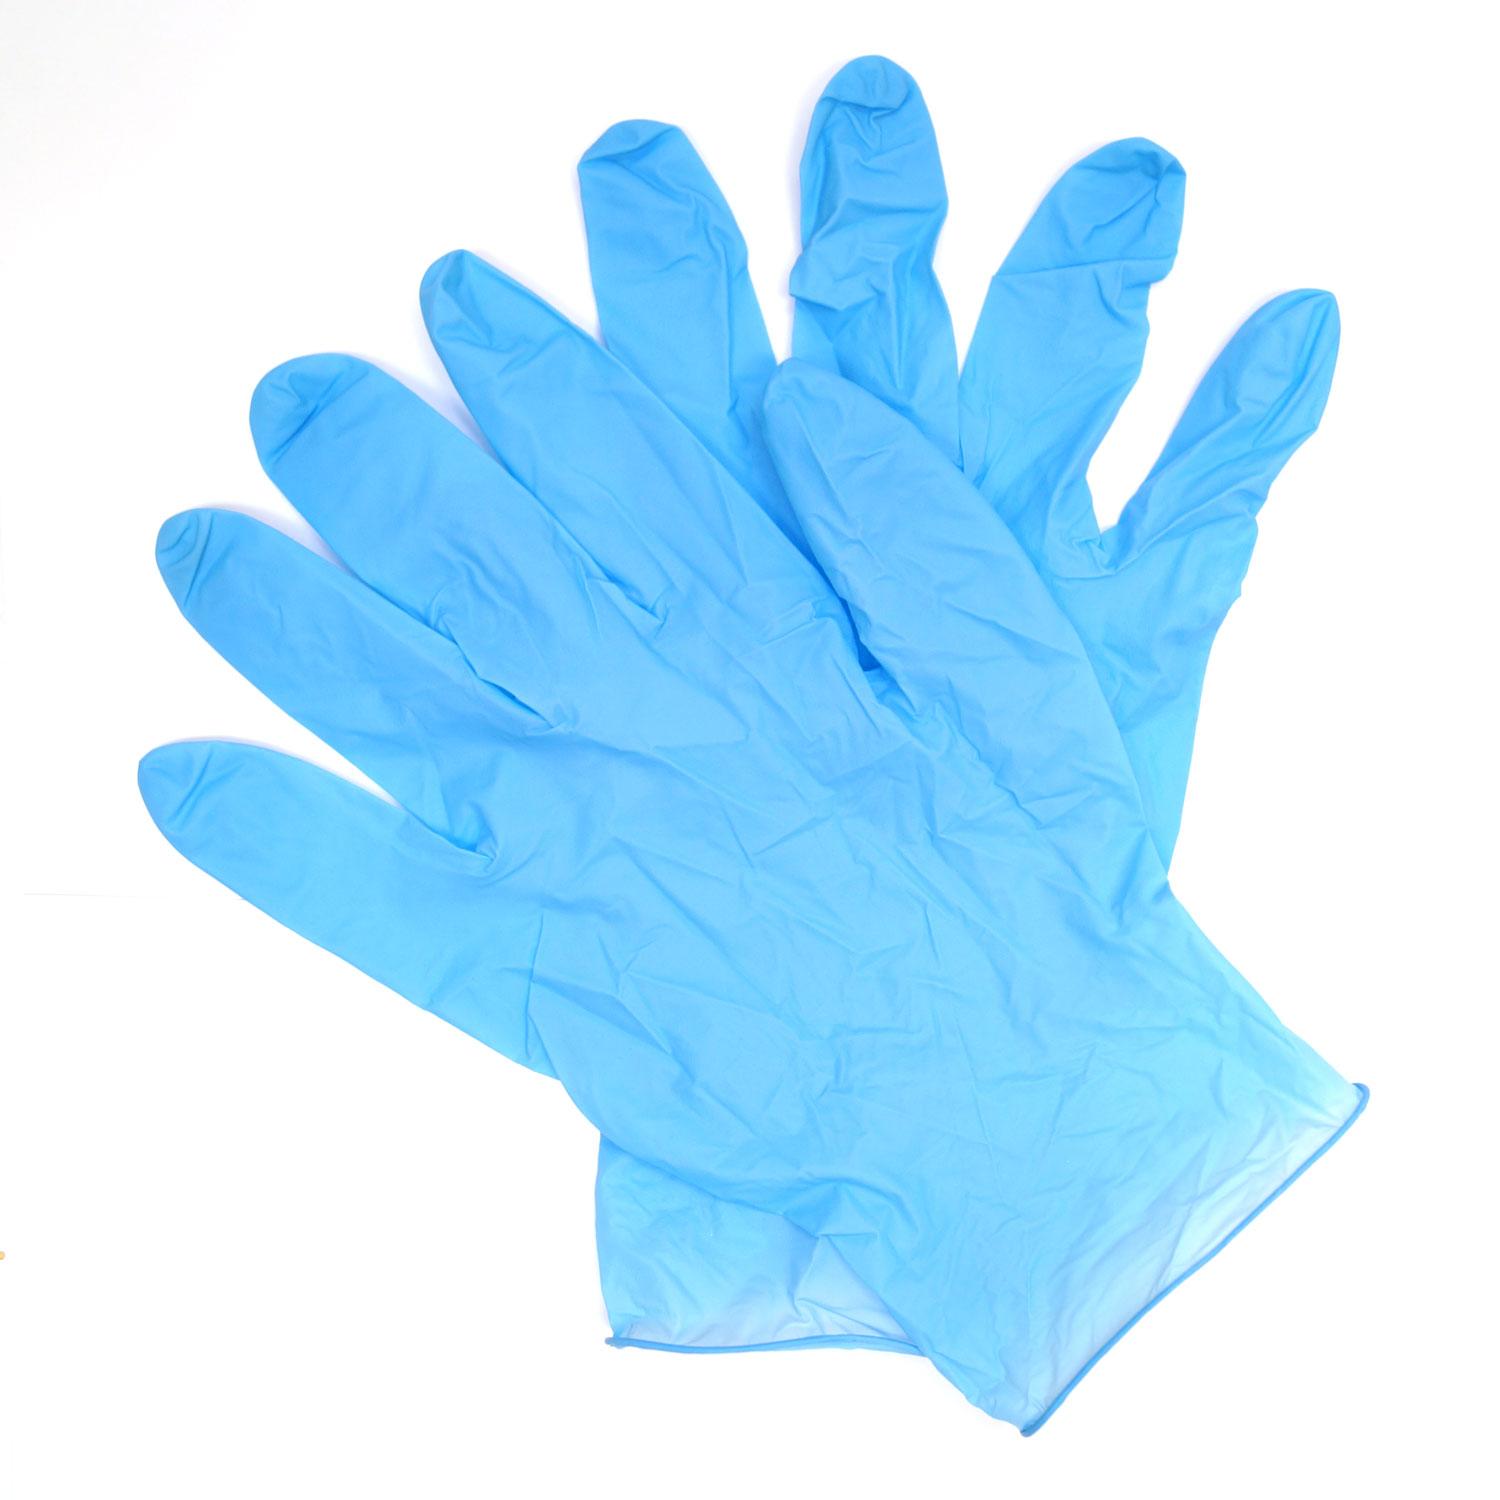 Nitrile Gloves are Gloves and Suits perfect for keeping almost all viruses out can also be customised using Printing in sizes 100 per box owing to small supplies the final product may look different than picture.